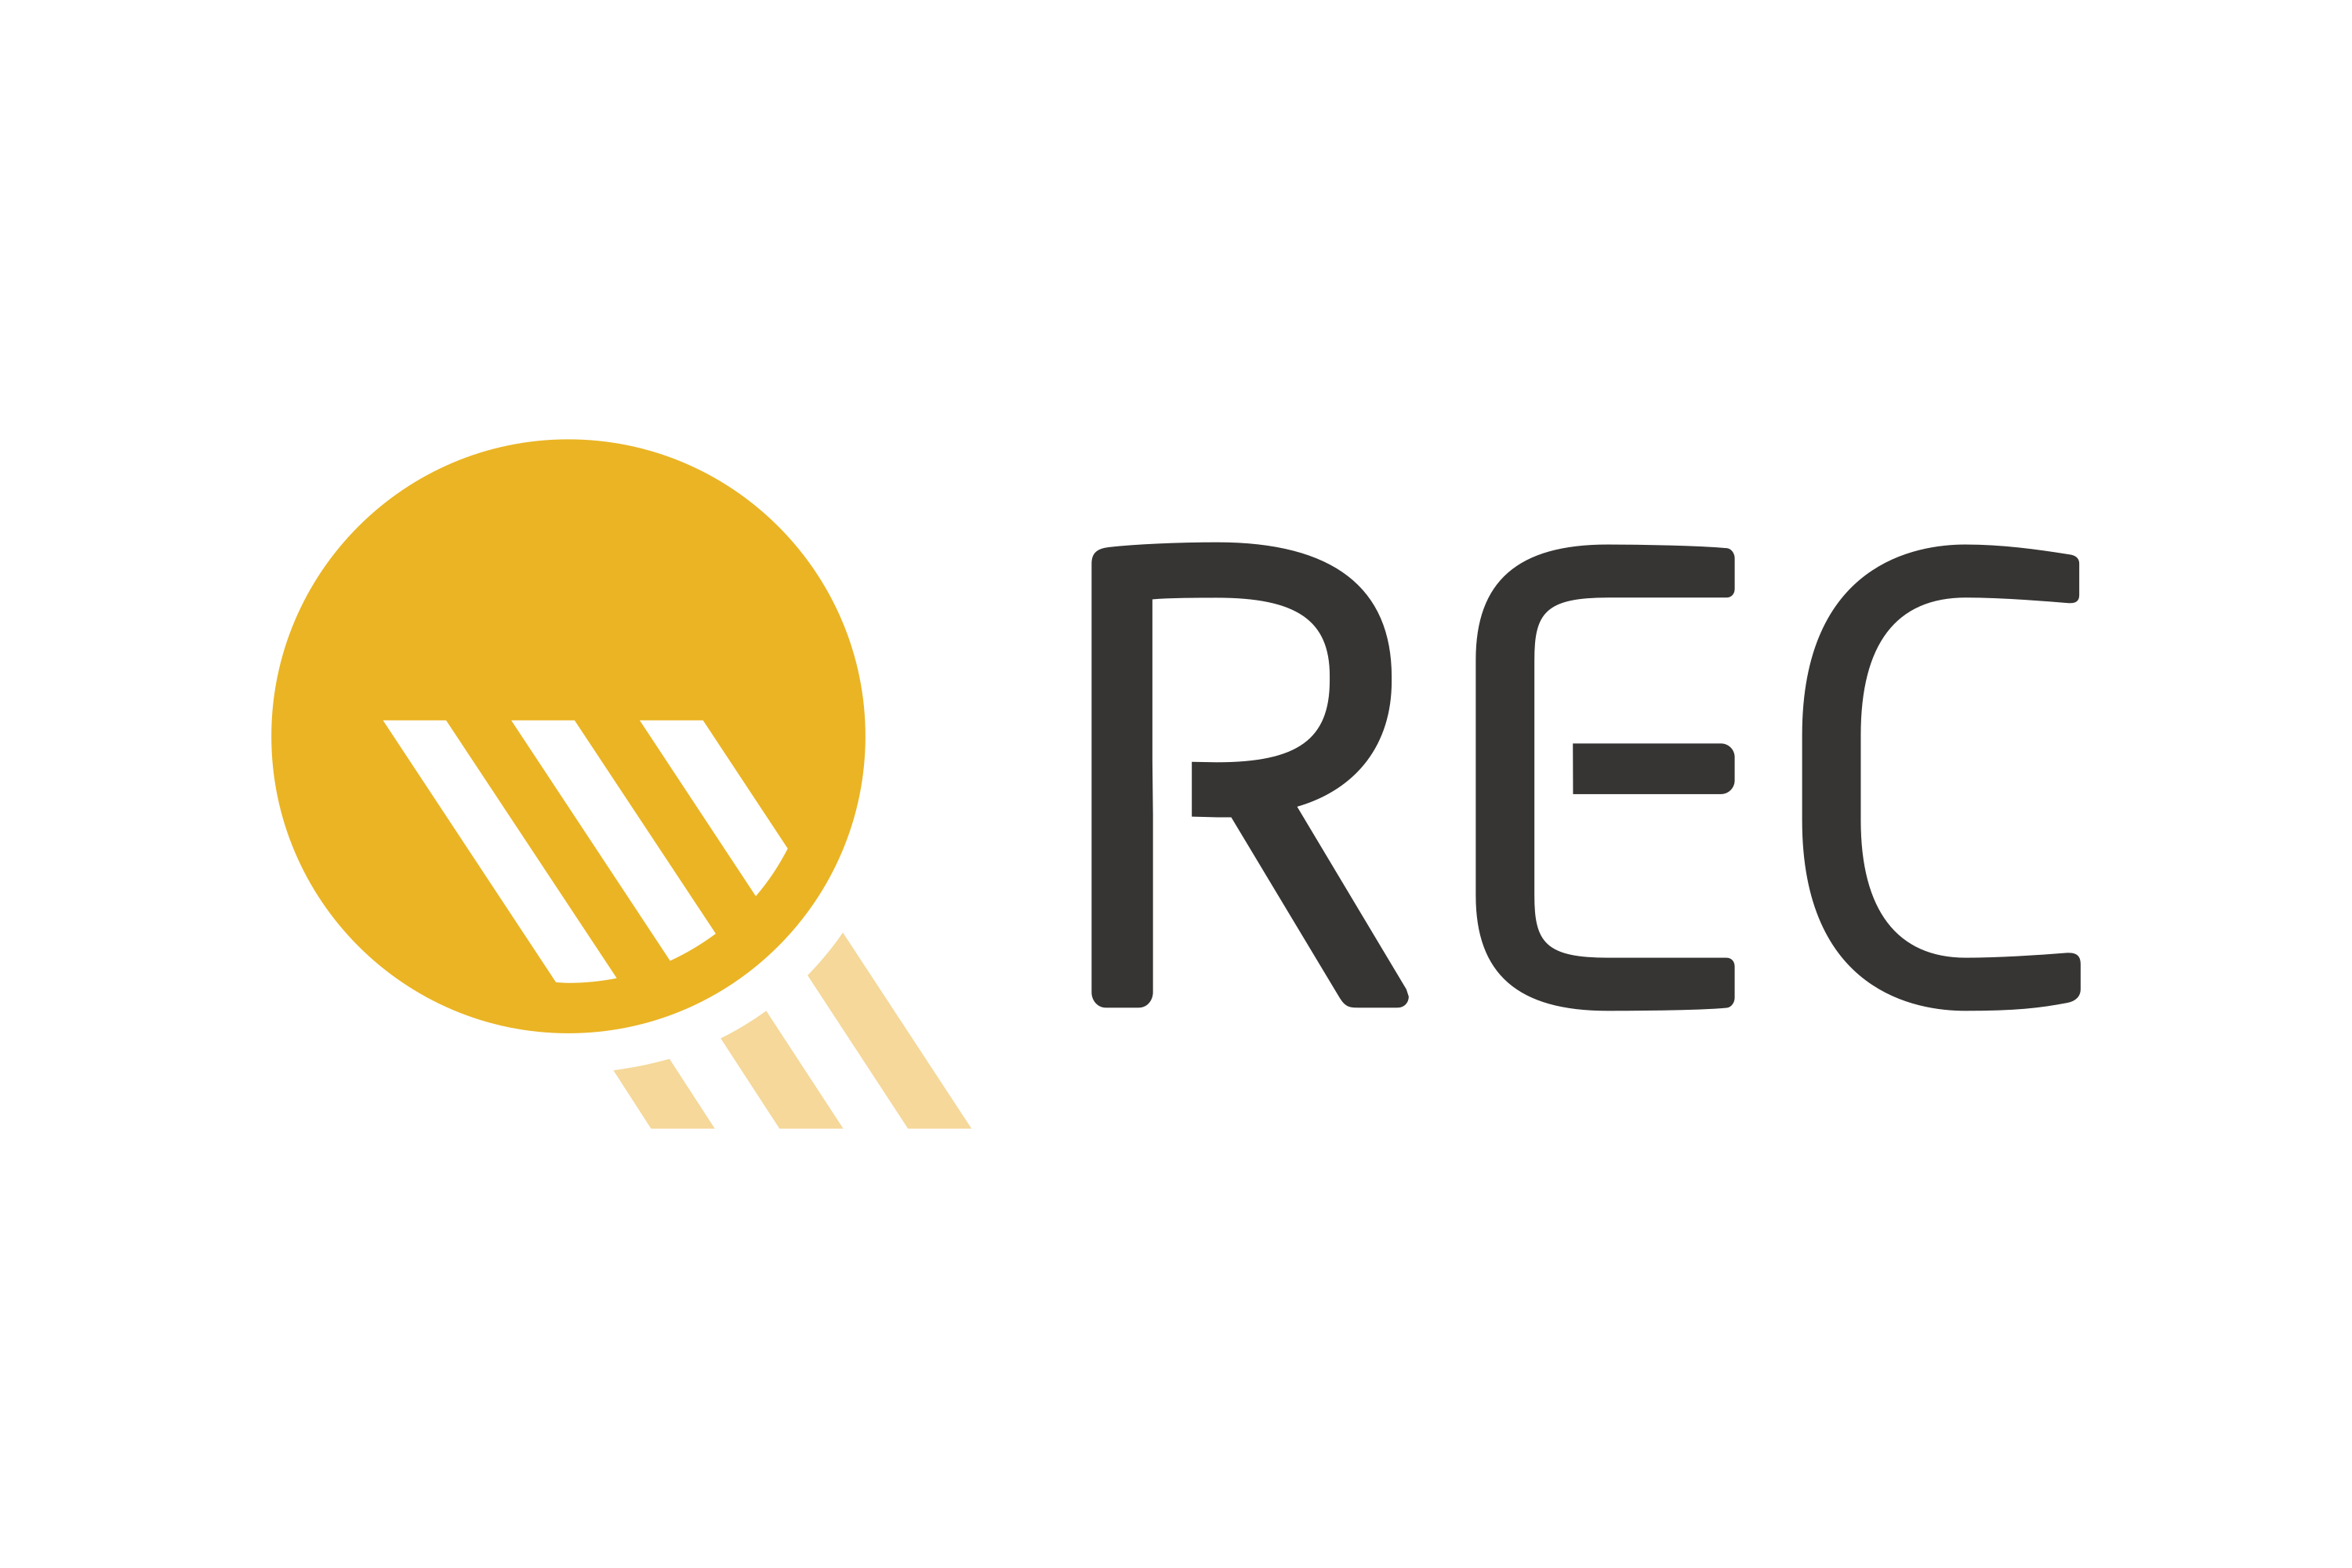 Download Renewable Energy Corporation Logo in SVG Vector or PNG File